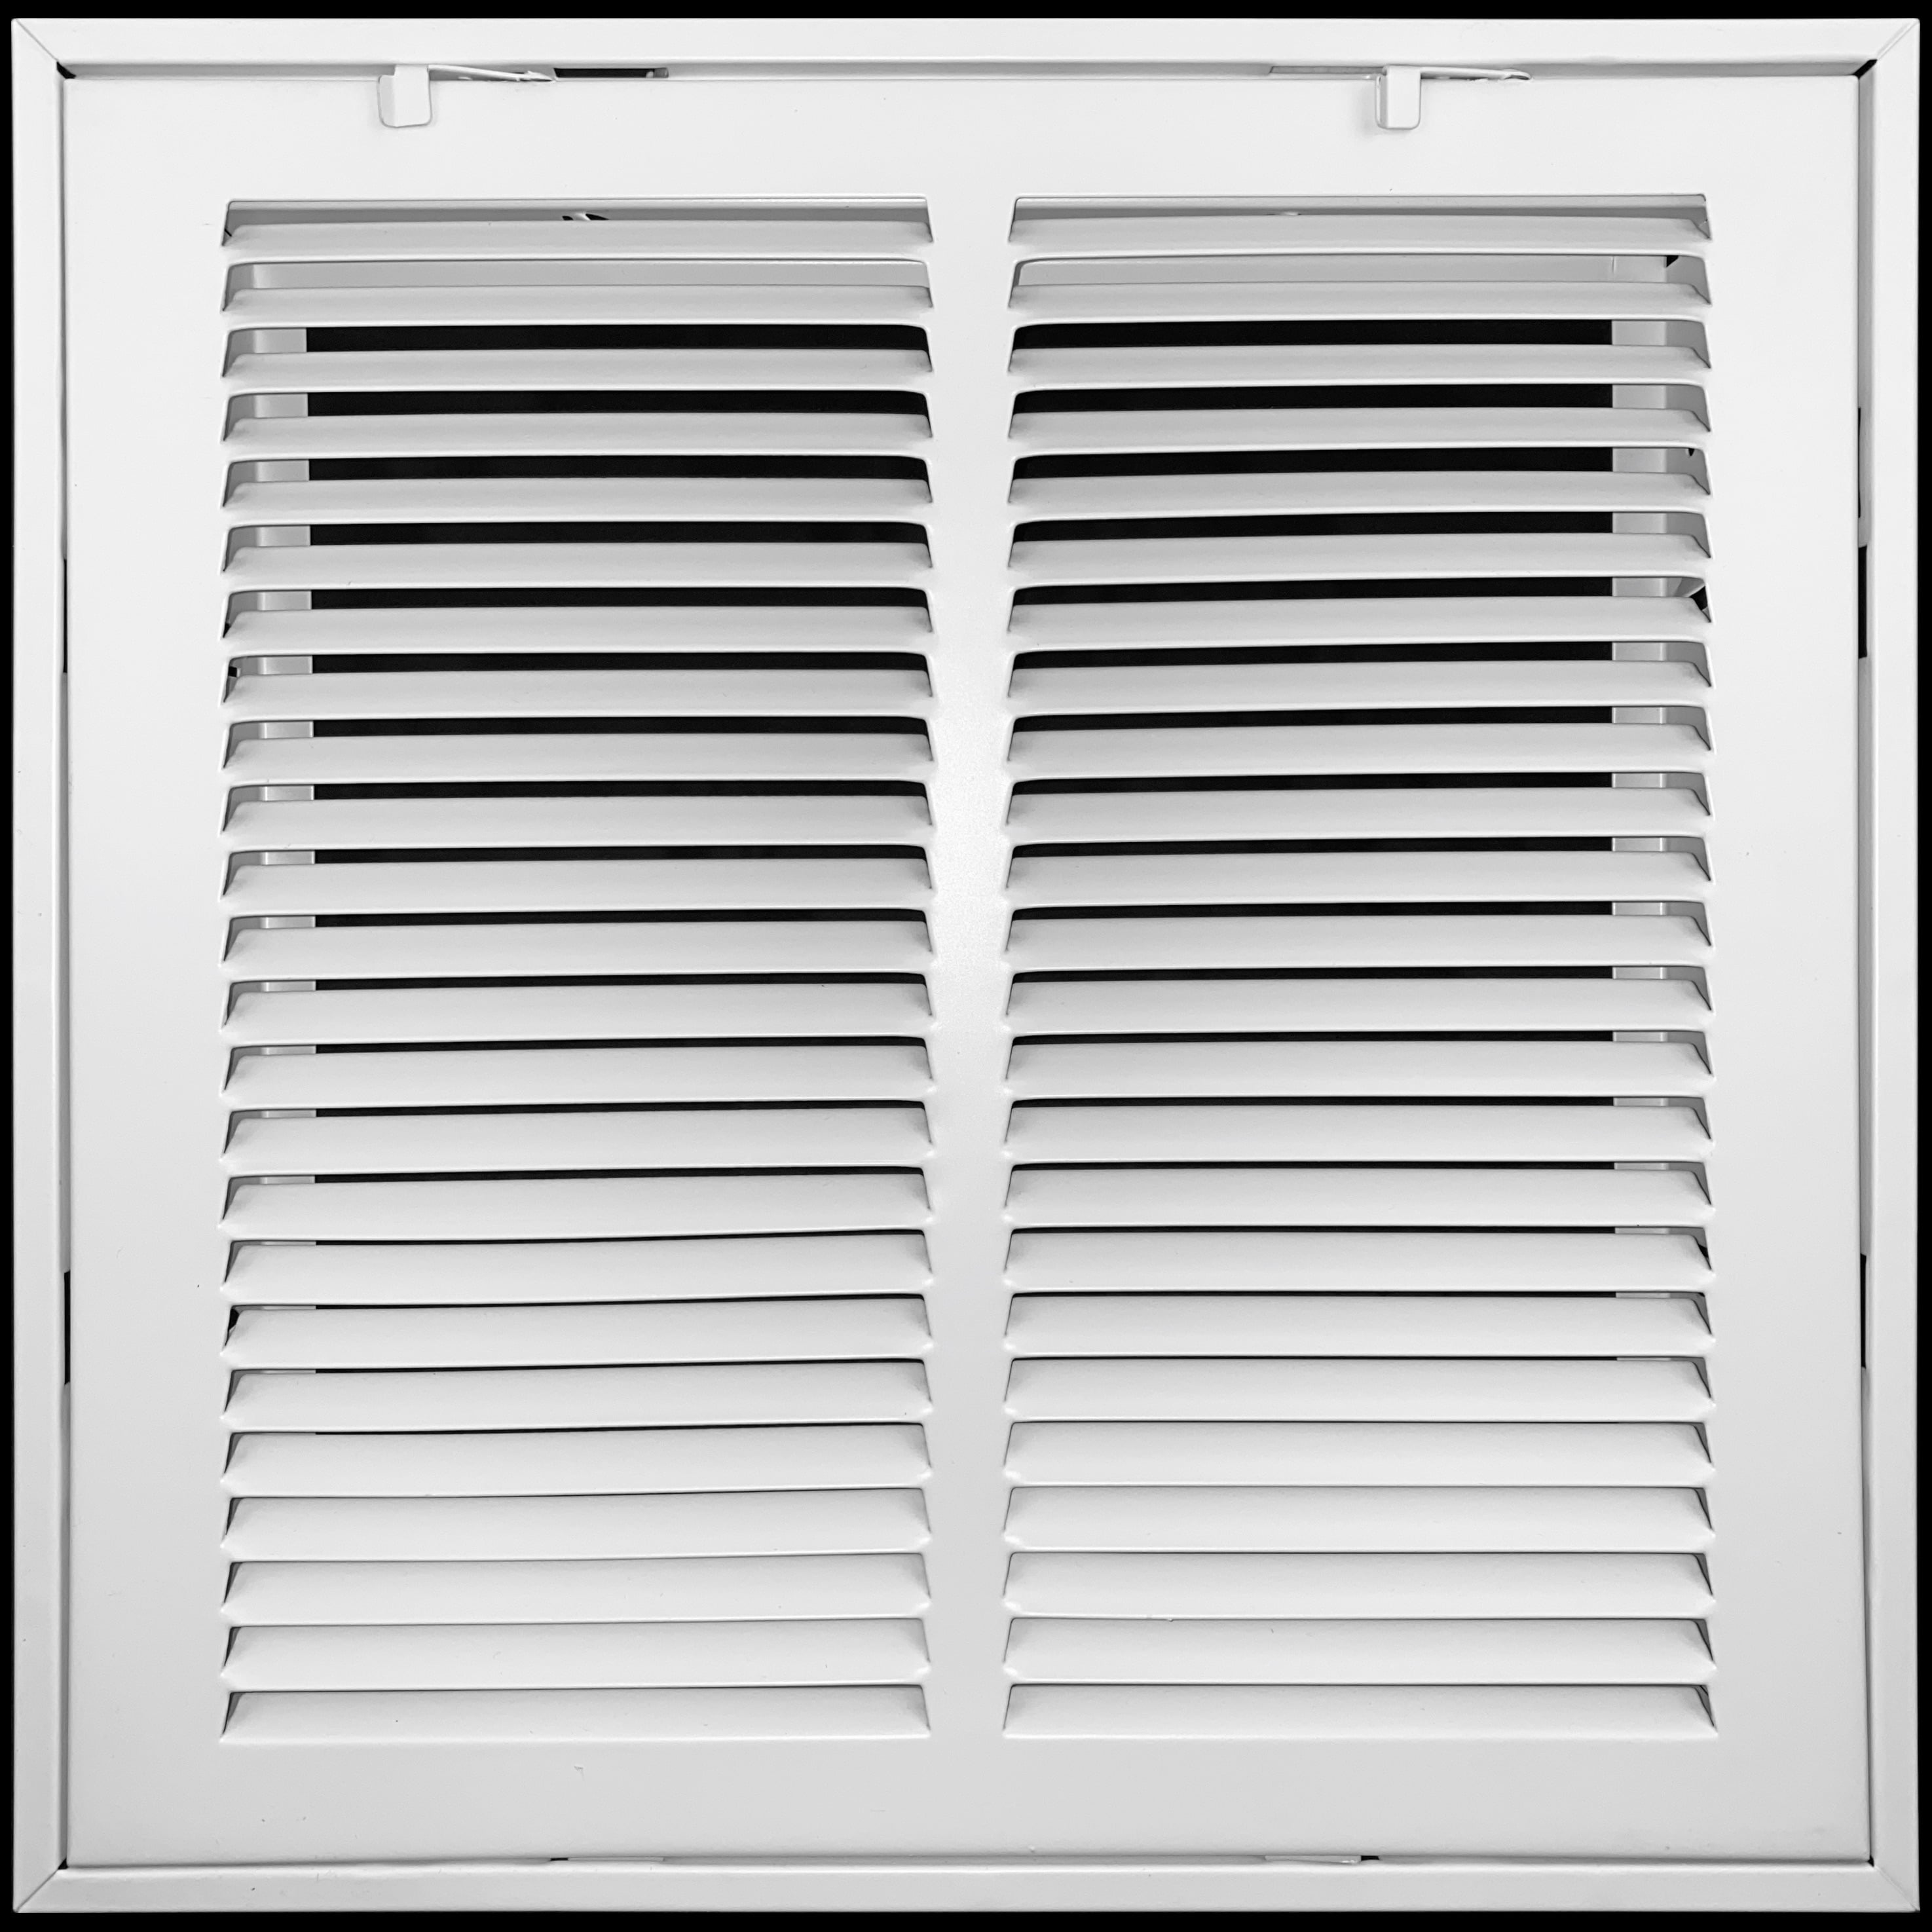 12" X 12" Steel Return Air Filter Grille [Removable Face/Door] for 1-inch Filters HVAC Duct 12 X 12 Return Air Filter Grille